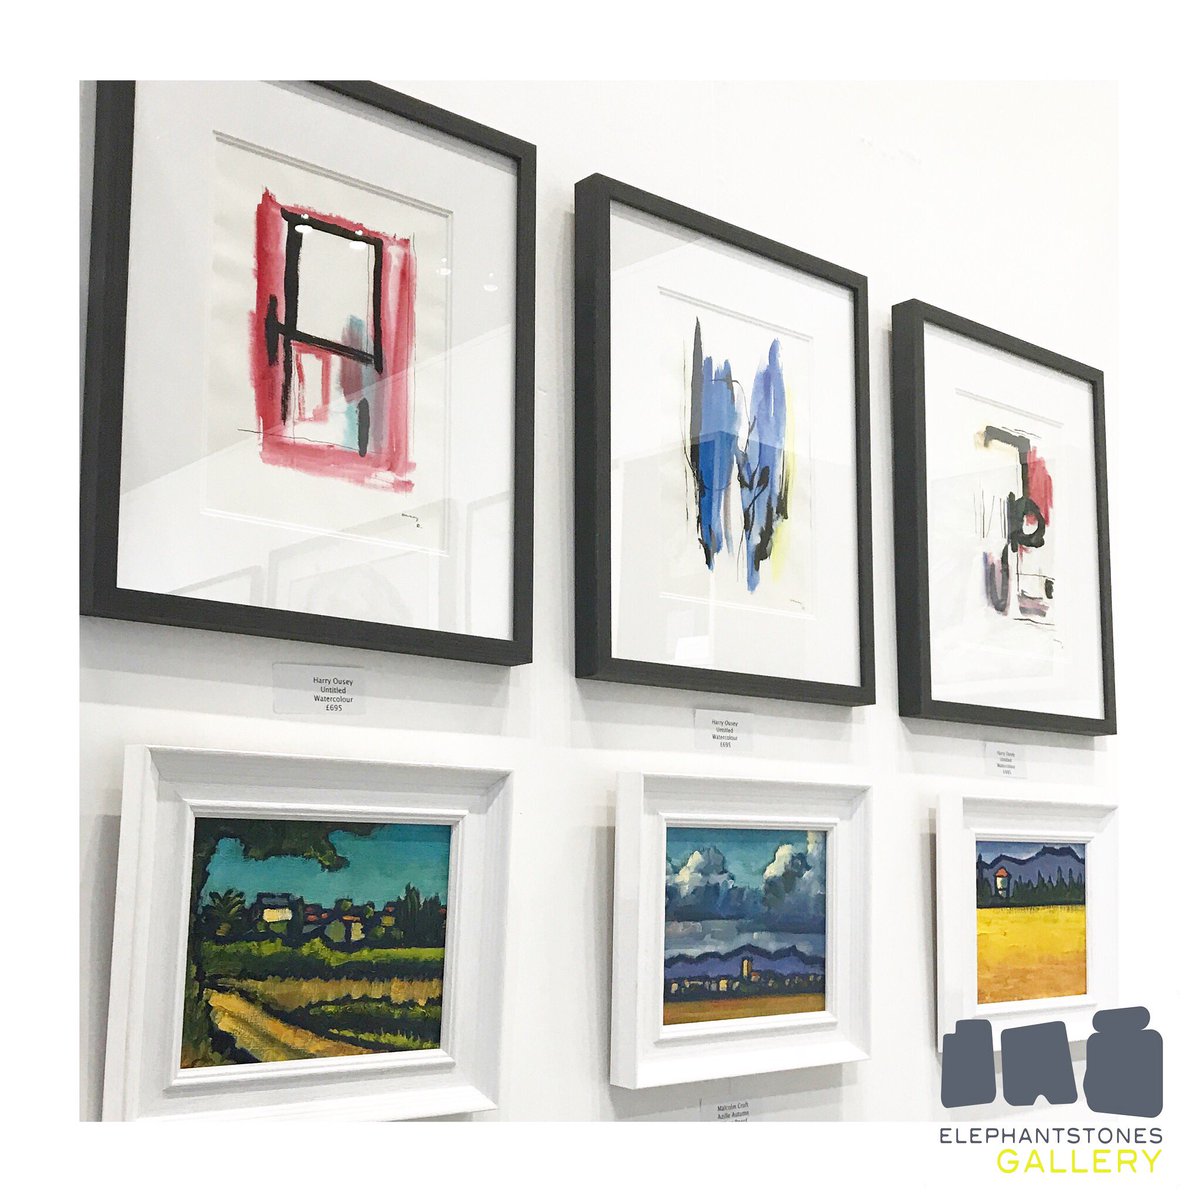 We visited the @mcrartfair to see the Harry Ousey works on show. Make sure you visit the show if you can! They are on stand 226 with @blackmoregallery #harry #ousey #art #fair #manchester #watercolour #landscape #abstract #colour #postwar #hayfield #peakdistrict #design #paint